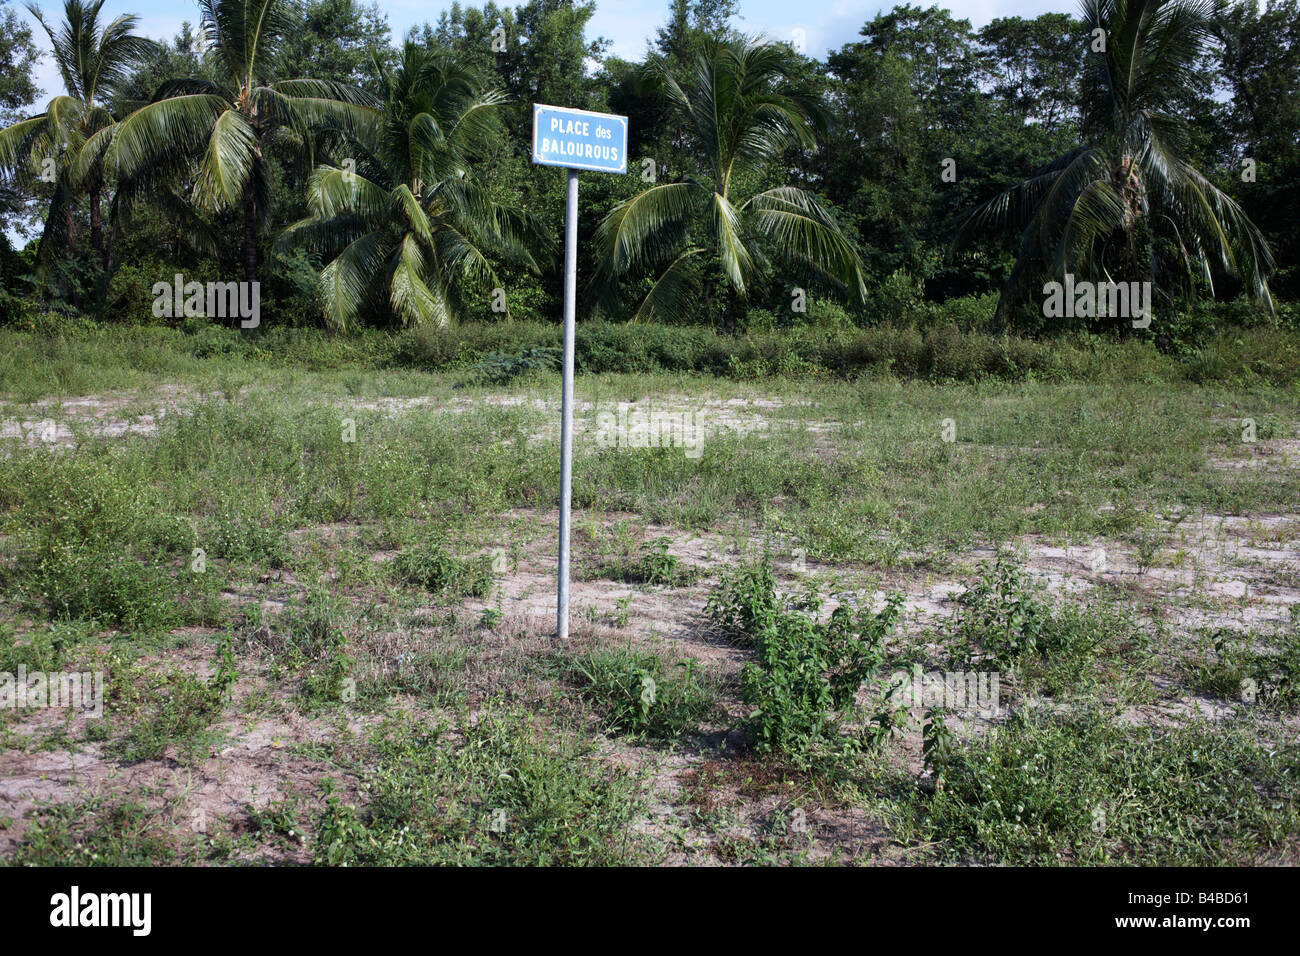 Sign post for a desolate Place Balourous on wasteland scrub near Kourou River in colonial quarter of Kourou, French Guiana Stock Photo